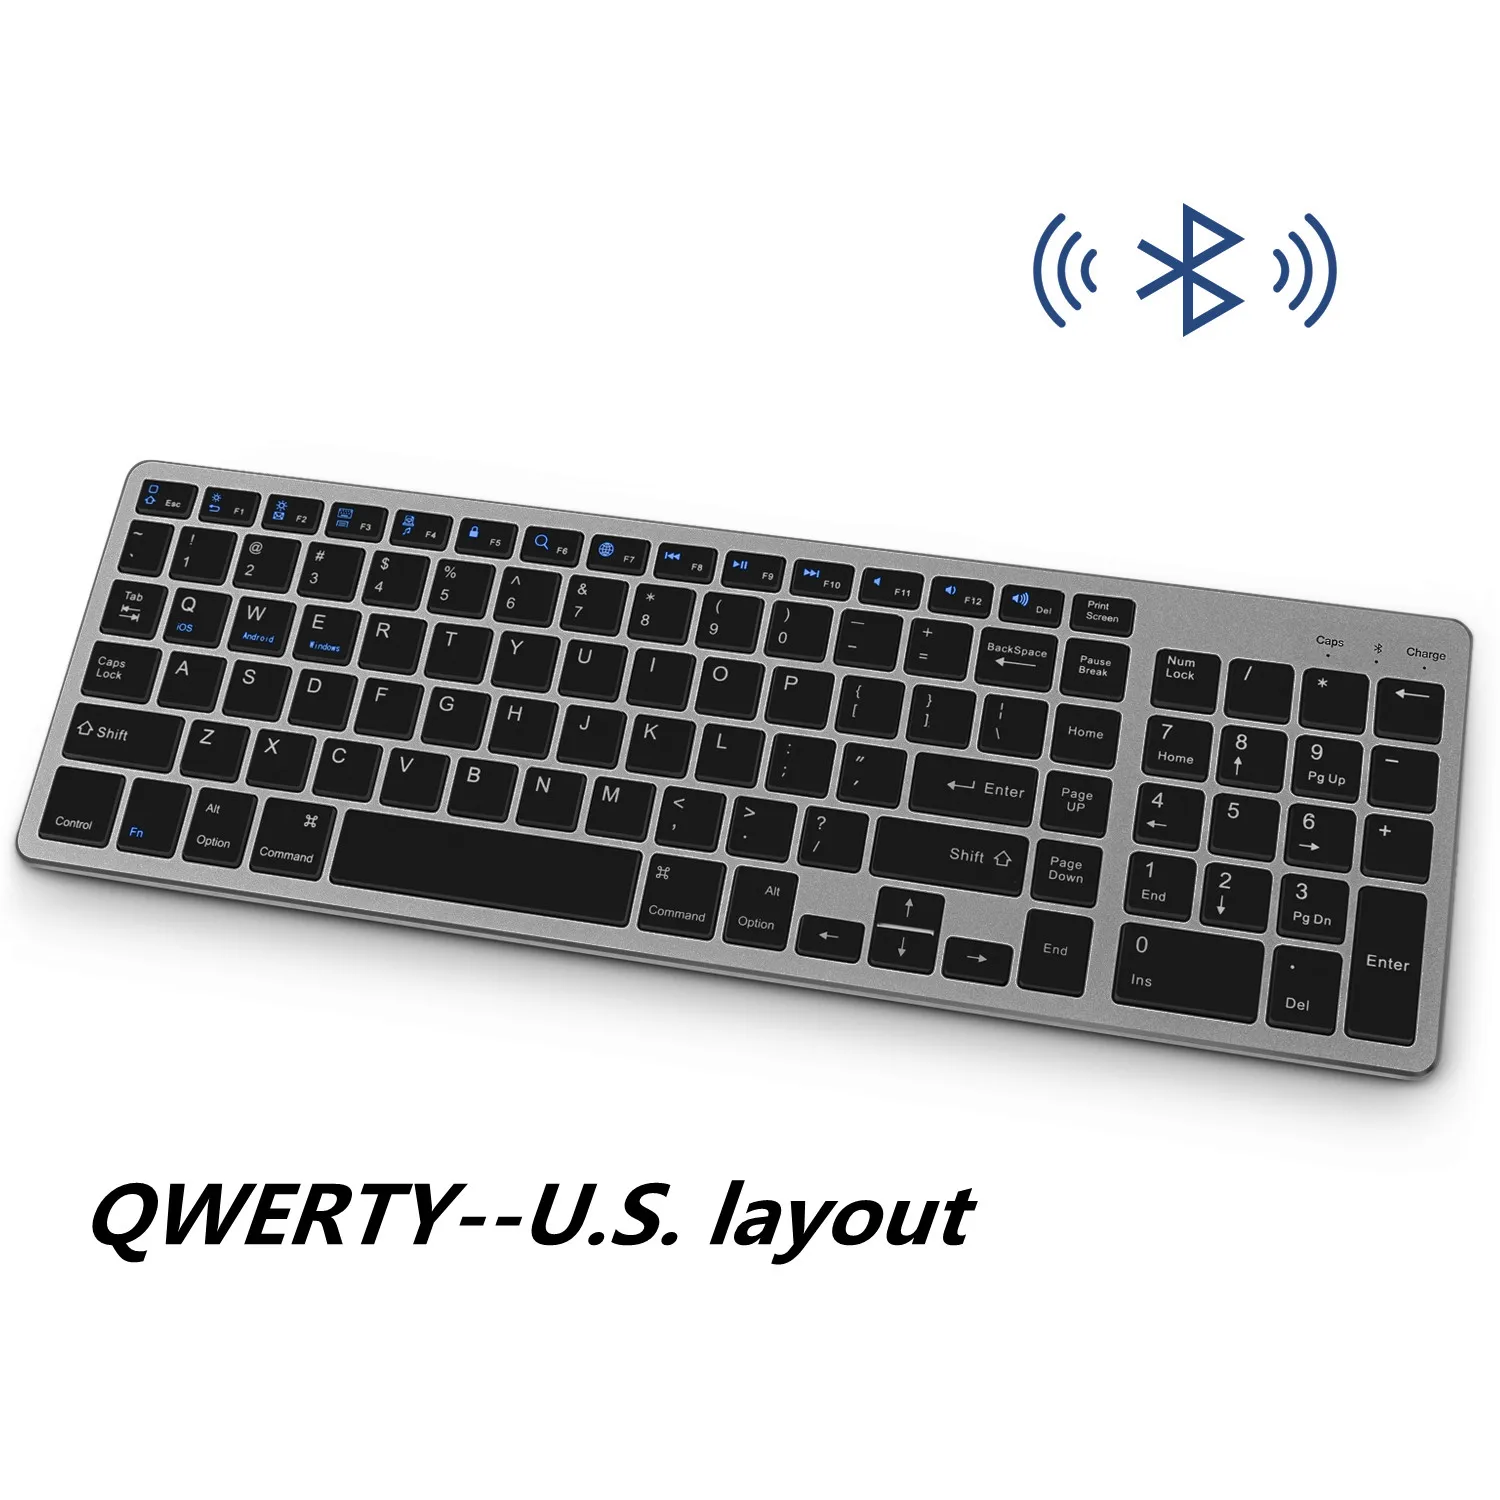 

Wireless Bluetooth Keyboard, Full-Size Design With Numeric Keypad. Suitable For Laptops, Desktops, PCs, Tablets, Gray And Black